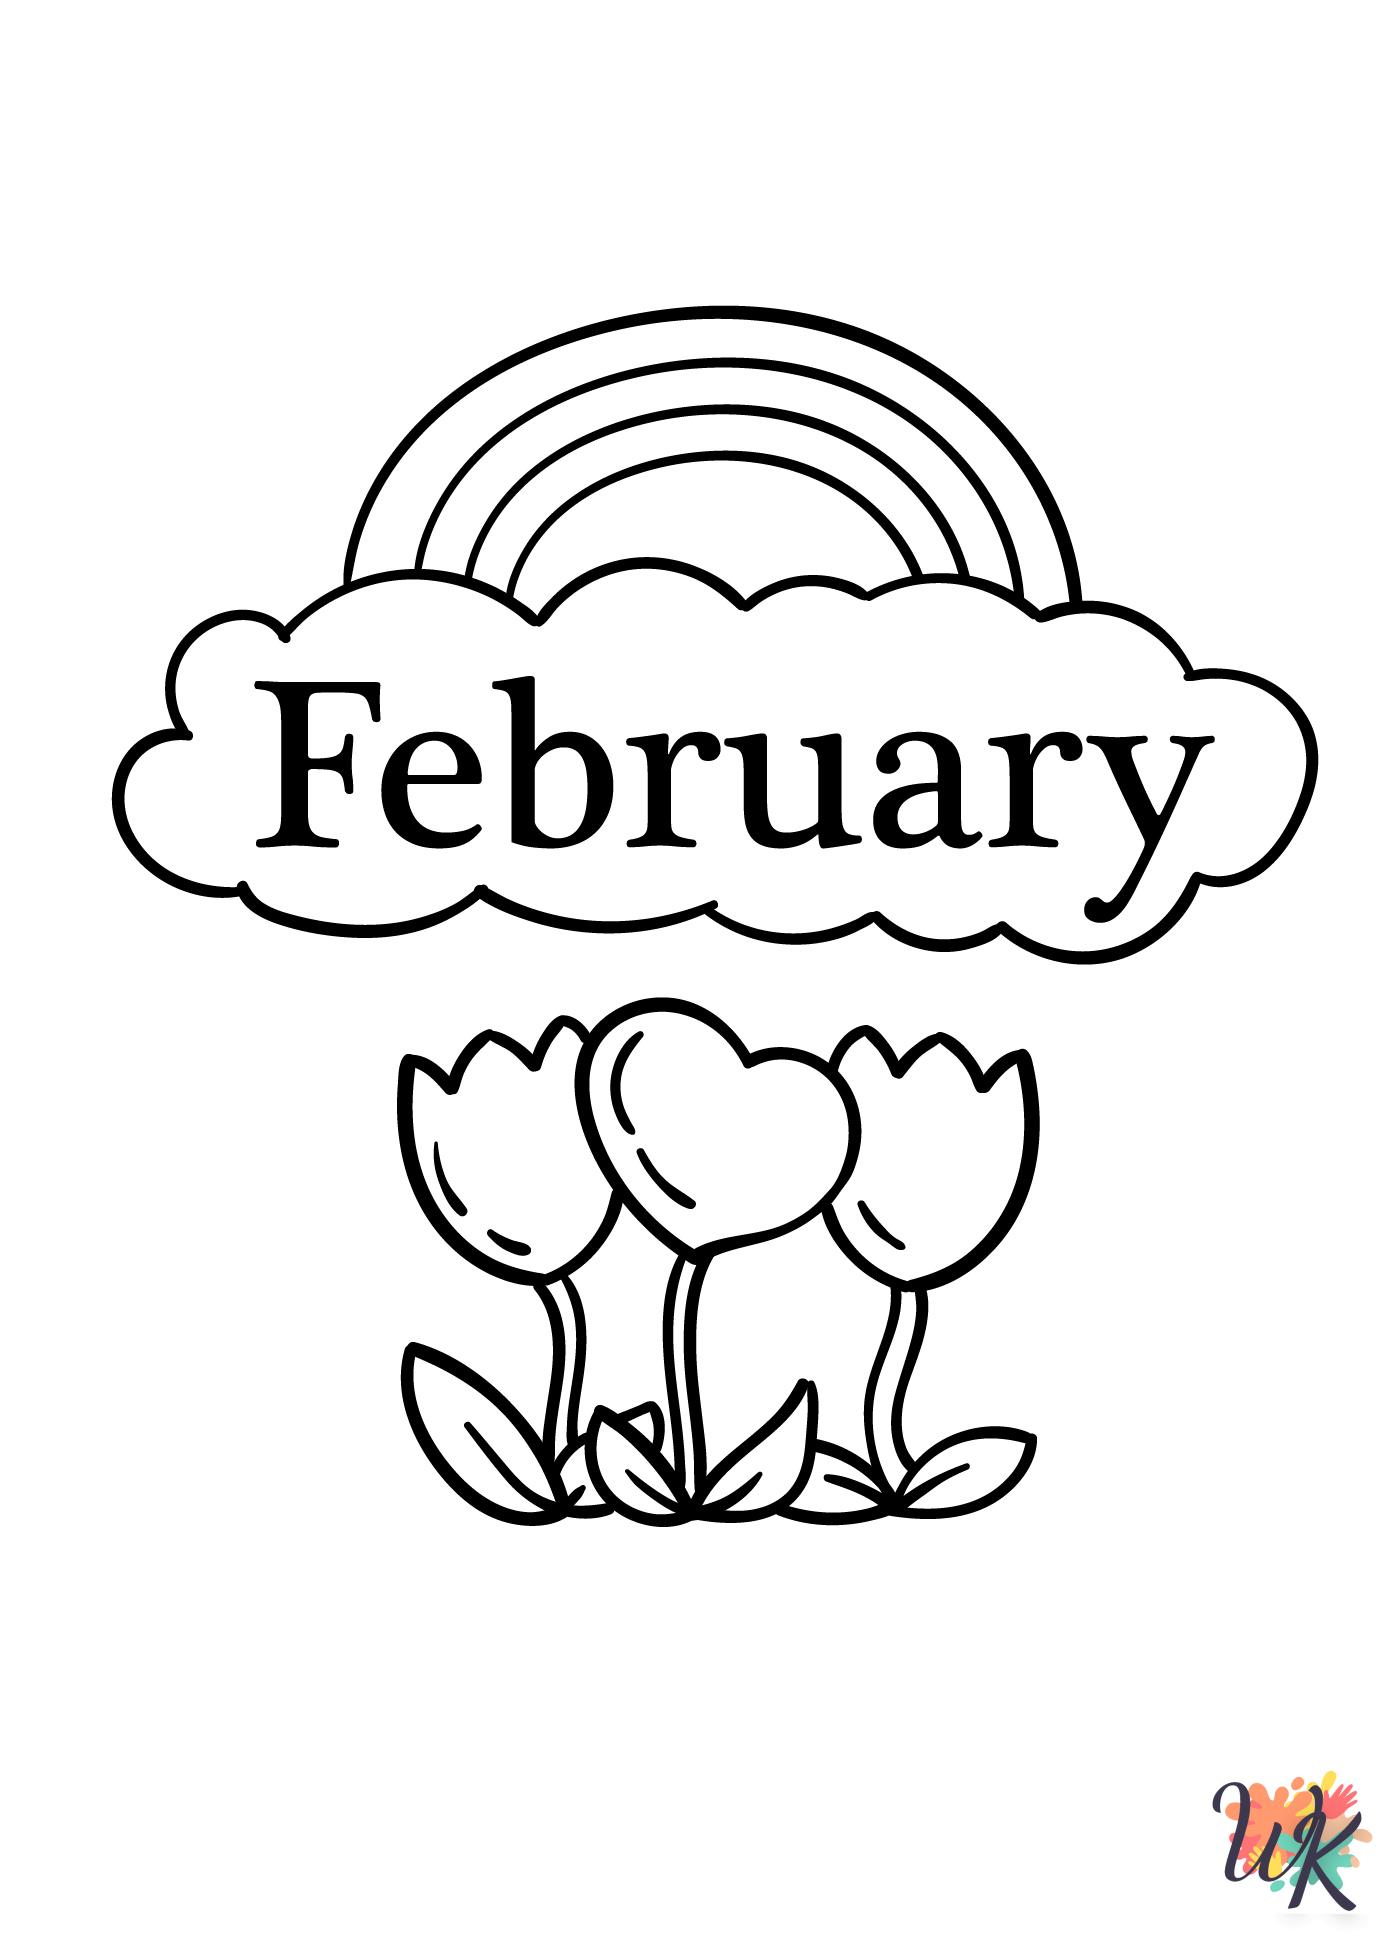 February free coloring pages